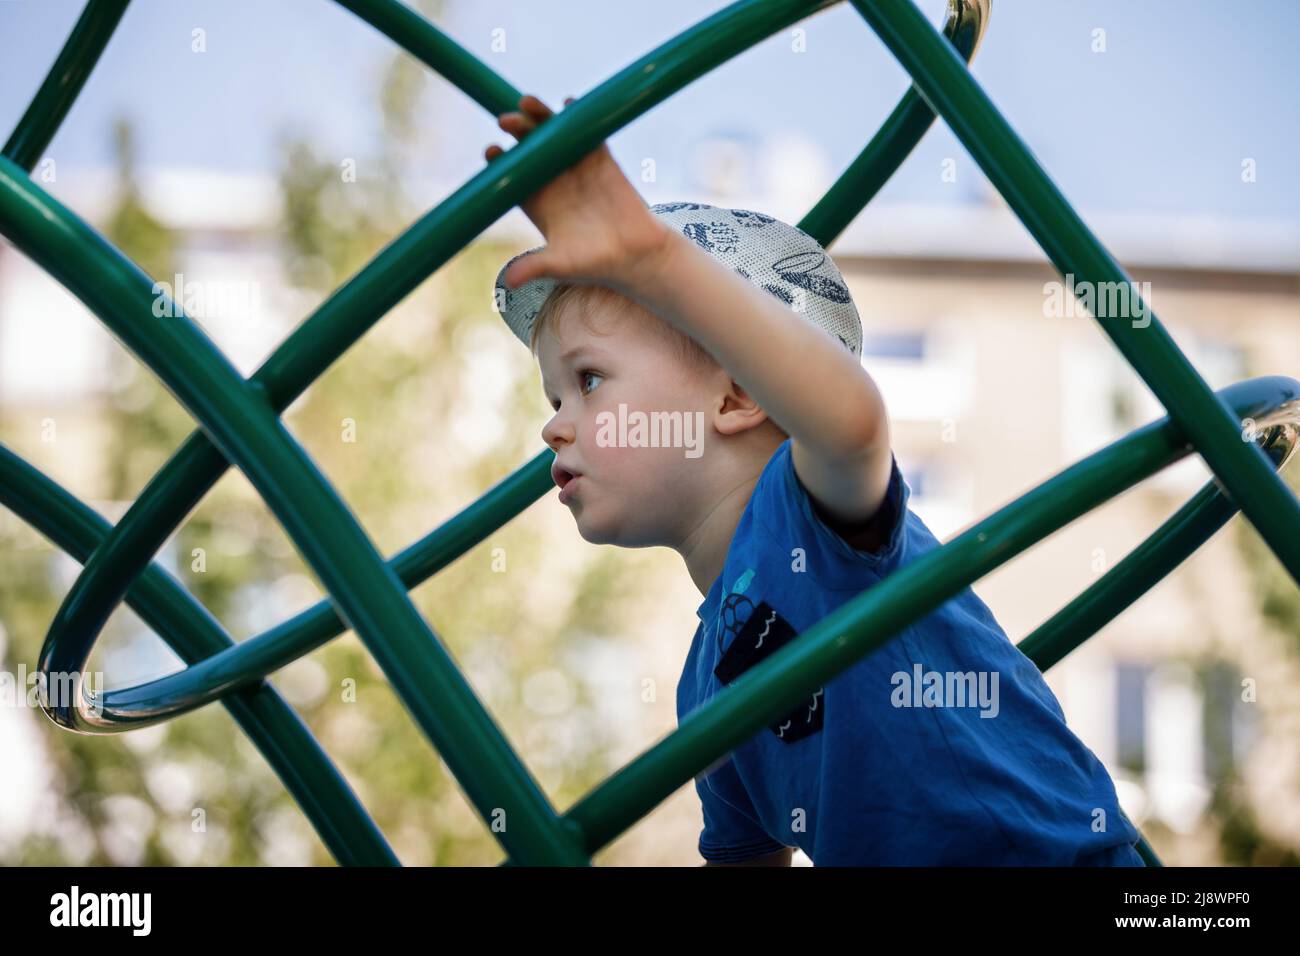 Little boy very focused climb on the green tube ladders in playground. Stock Photo